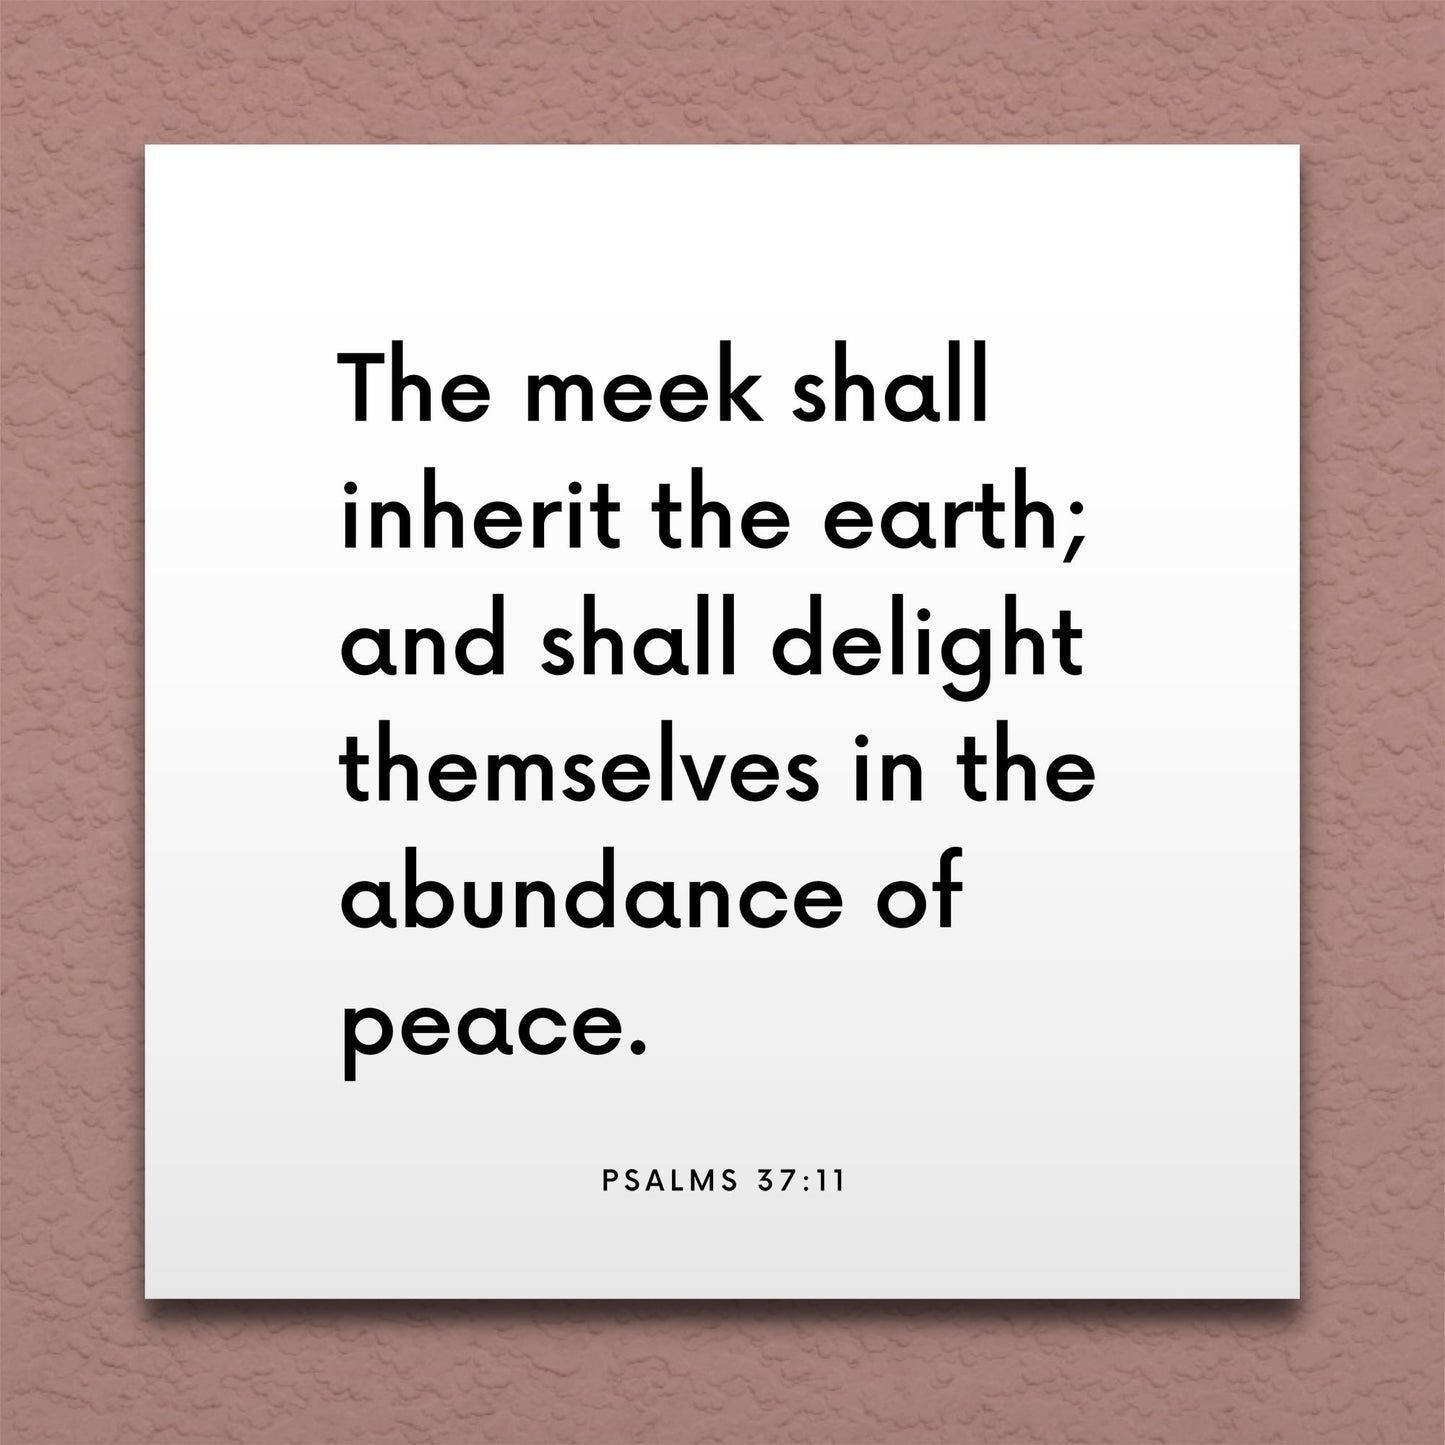 Wall-mounted scripture tile for Psalms 37:11 - "The meek shall inherit the earth"